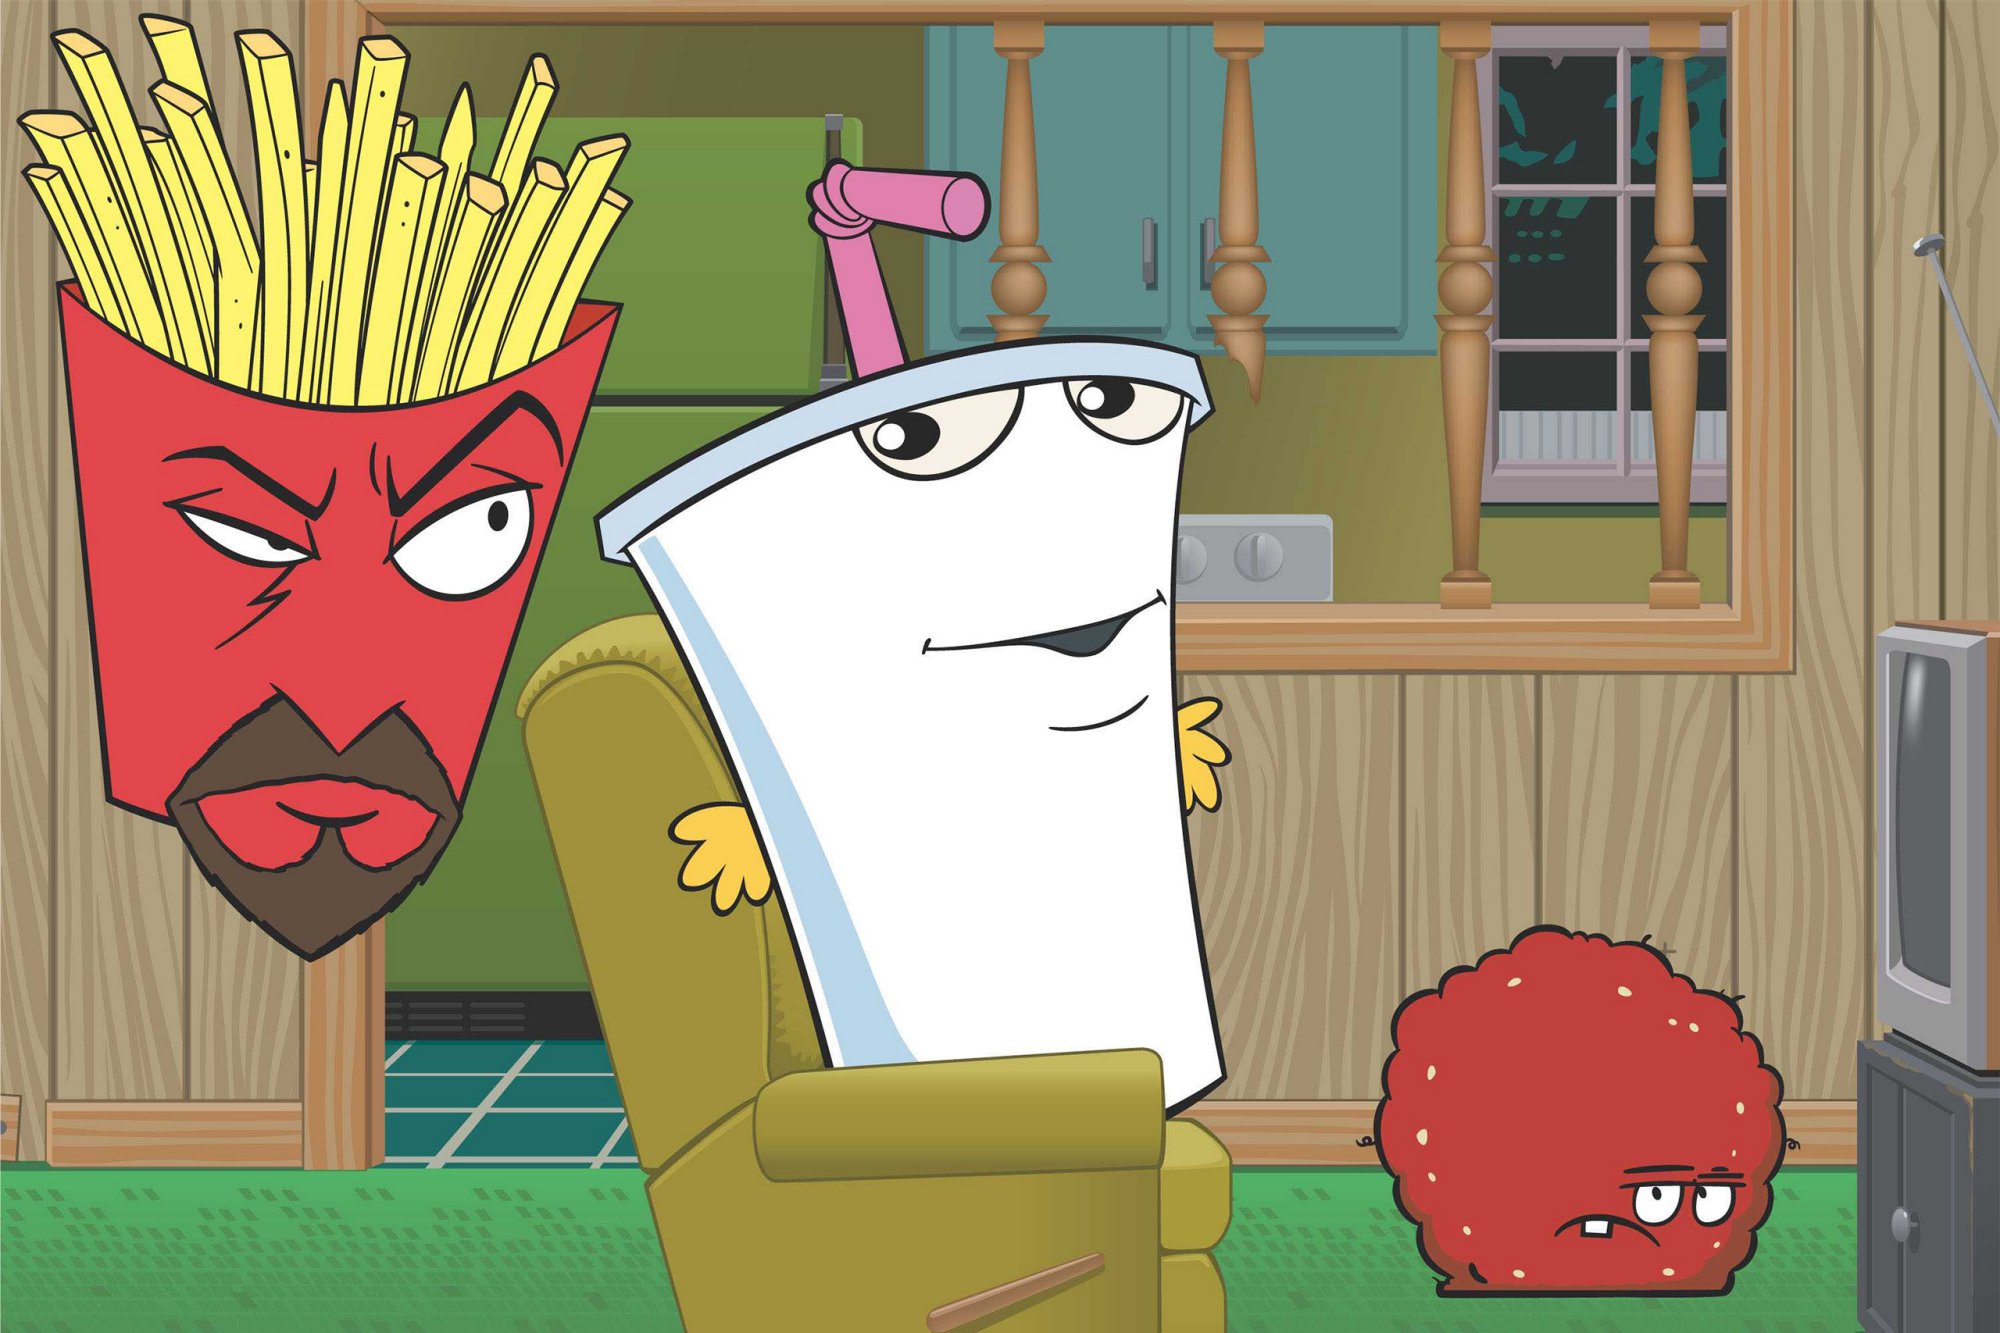 Frylock, Master Shake, and Meatwad in a living room in Aqua Teen Hunger Force.